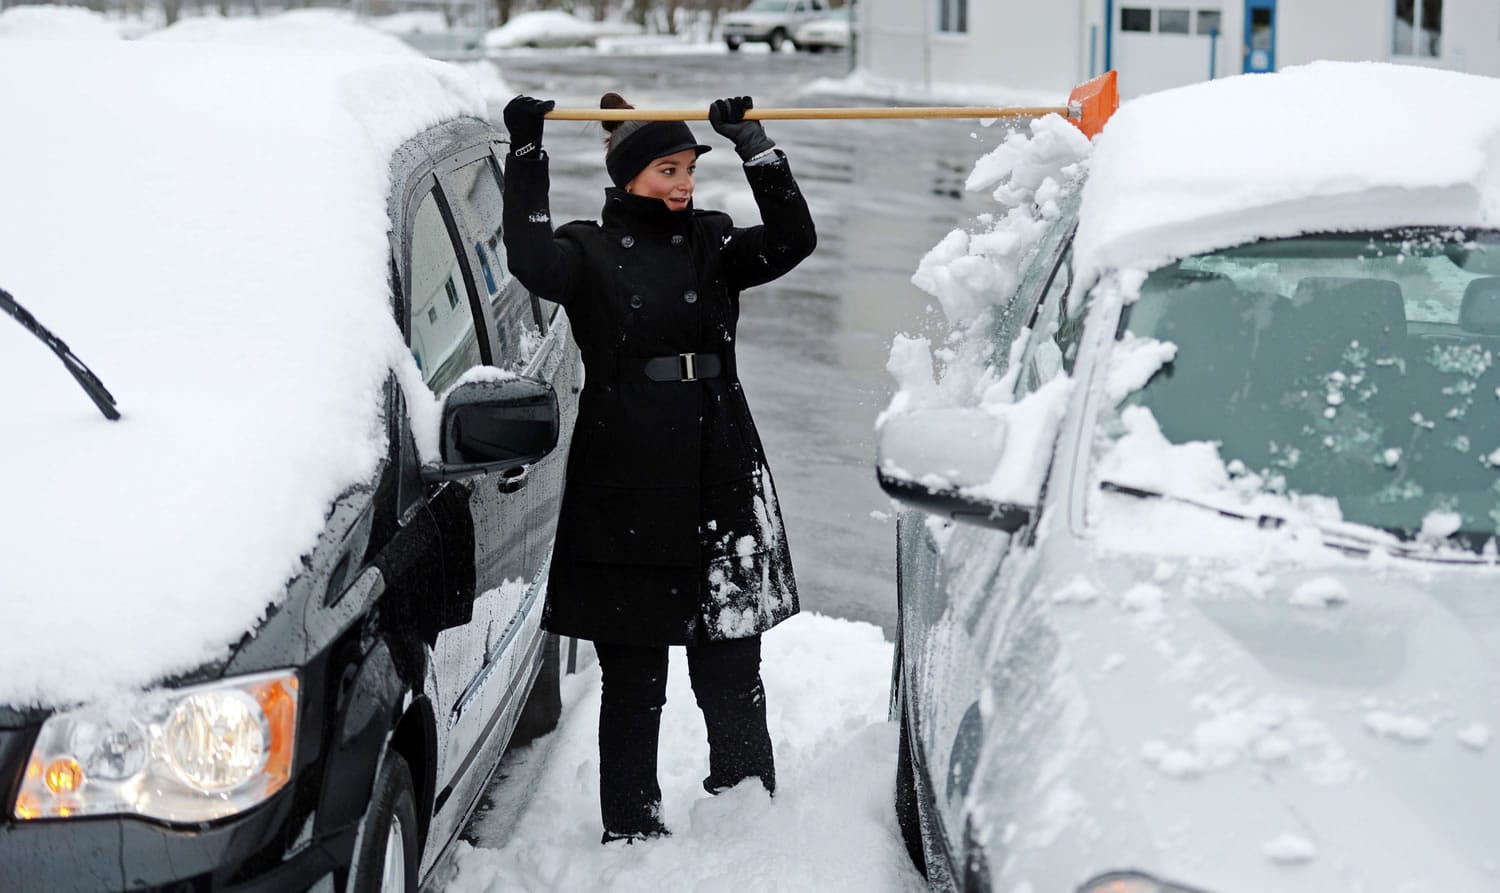 Kamila Pelliccia, a sales consultant at Don Mallon Chevrolet in Norwich, Conn., clears snow off vehicles in the dealership lot Wednesday.